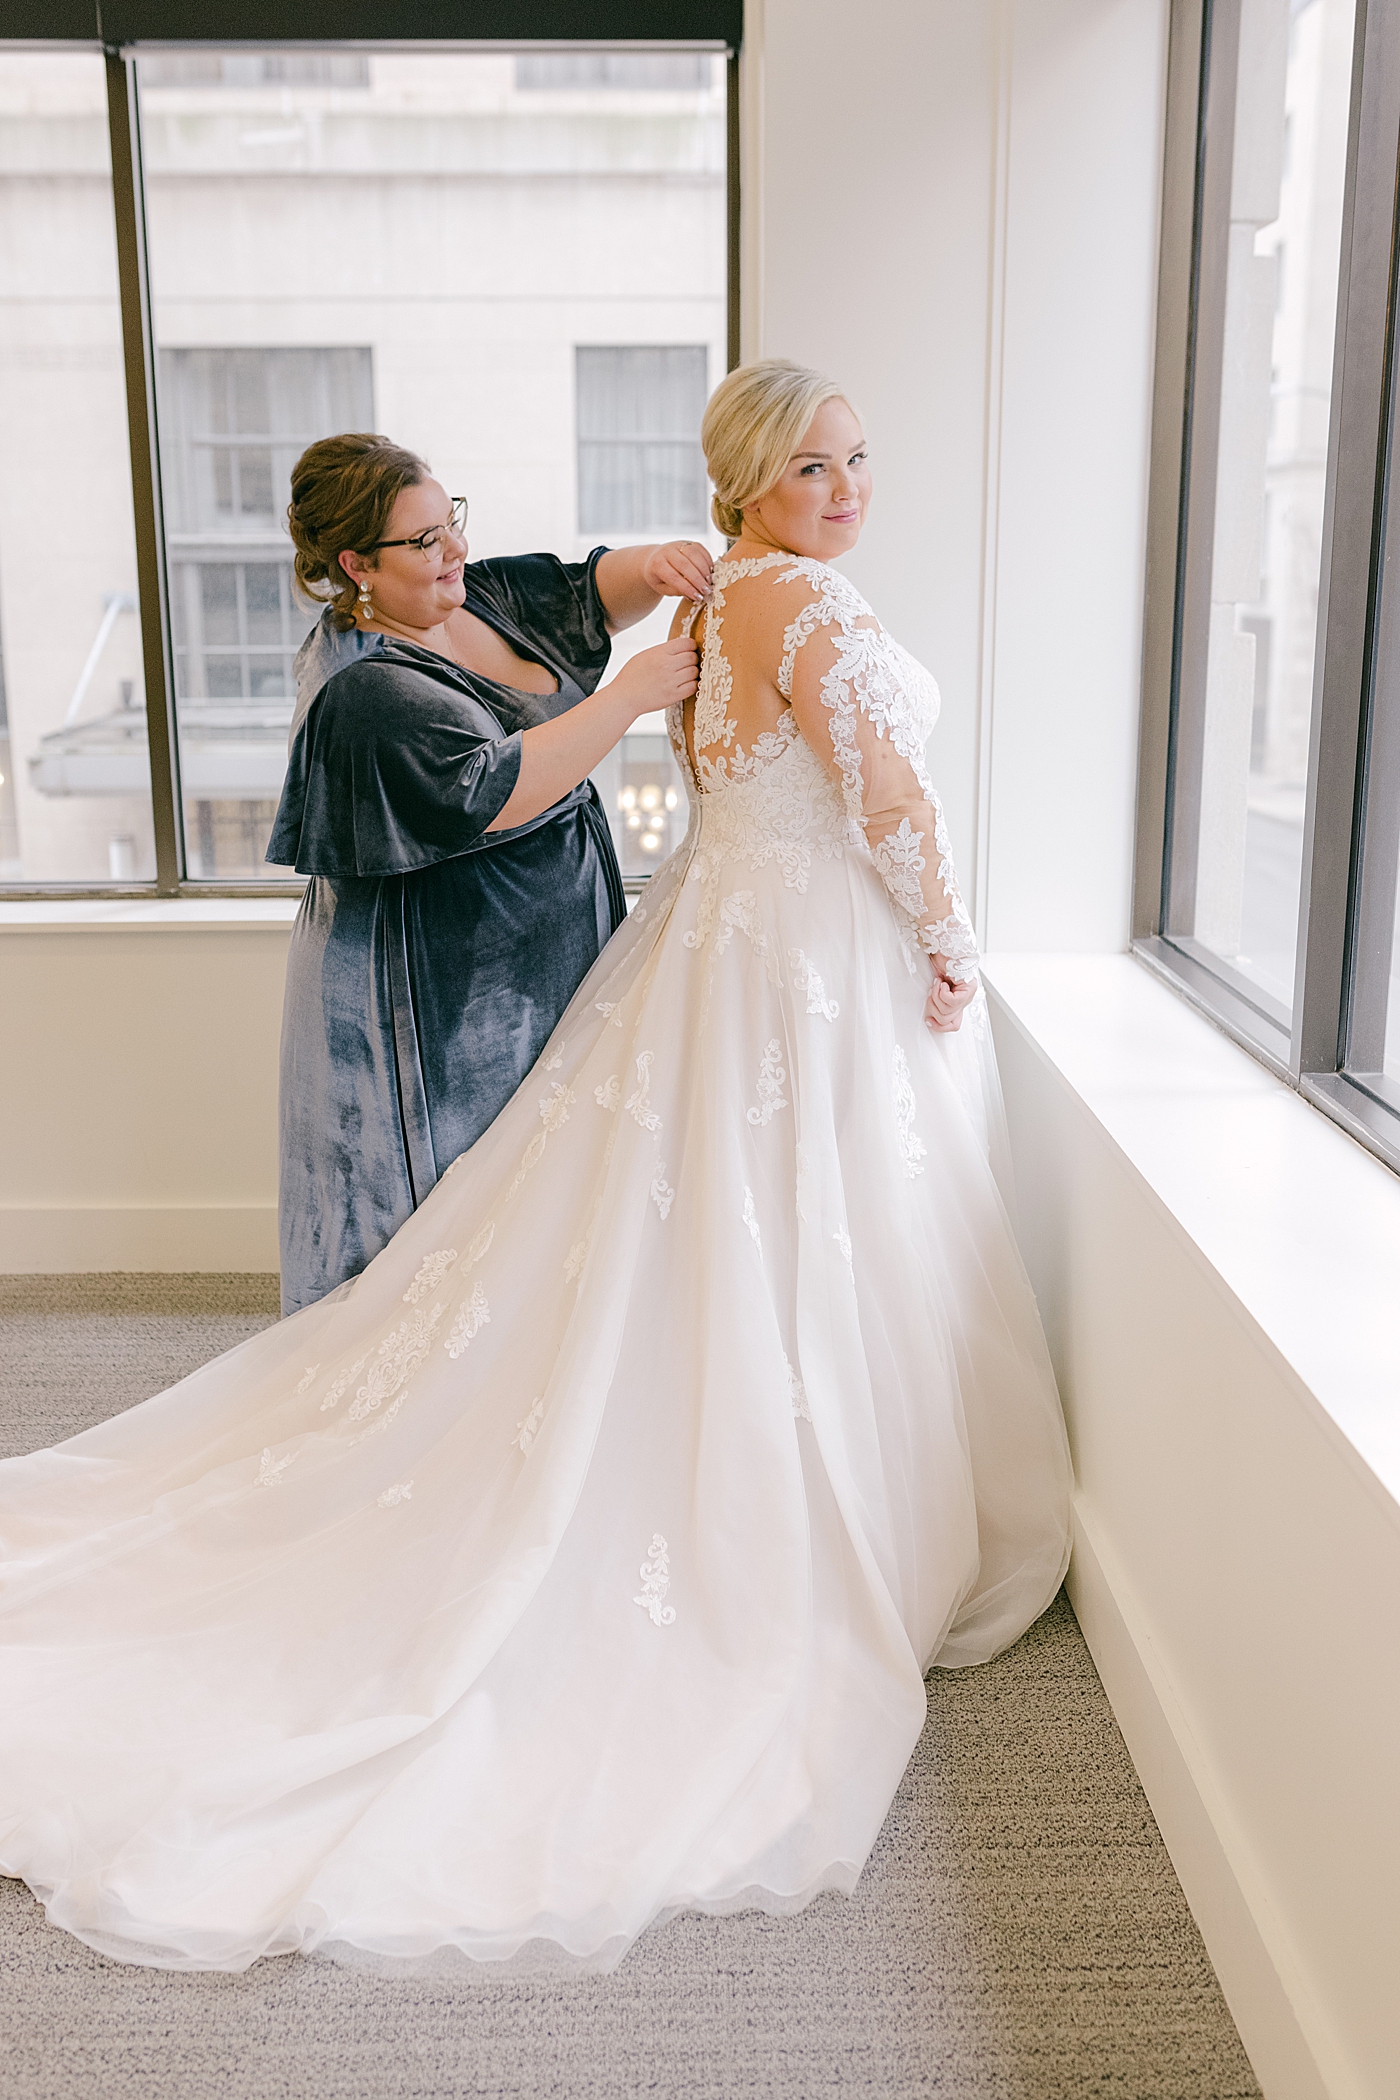 Bride being buttoned into her dress | Photo by Hope Helmuth Photography